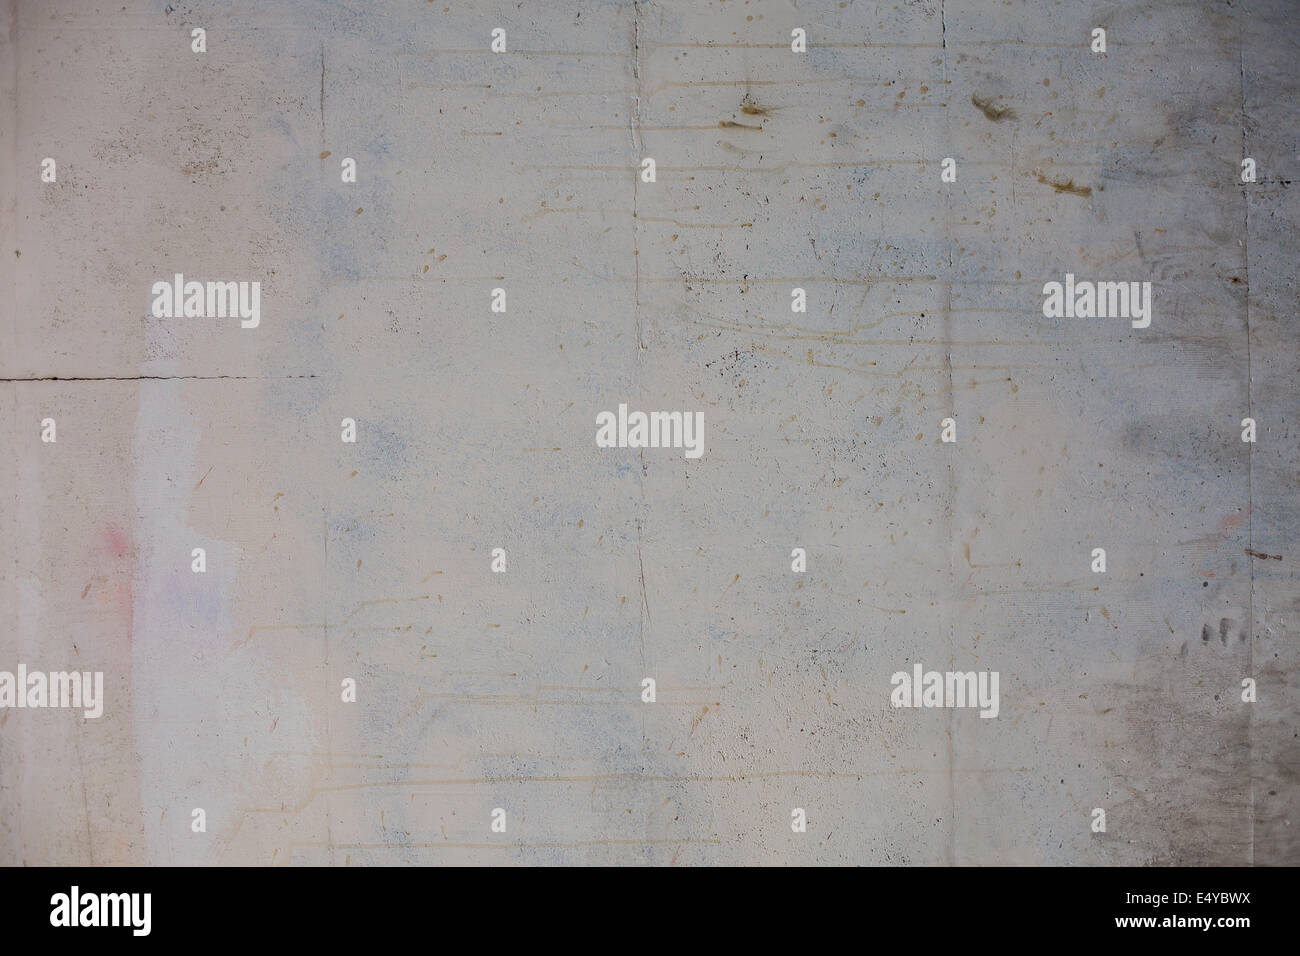 Grunge texture of concrete wall in various hues with scratches and dust Stock Photo